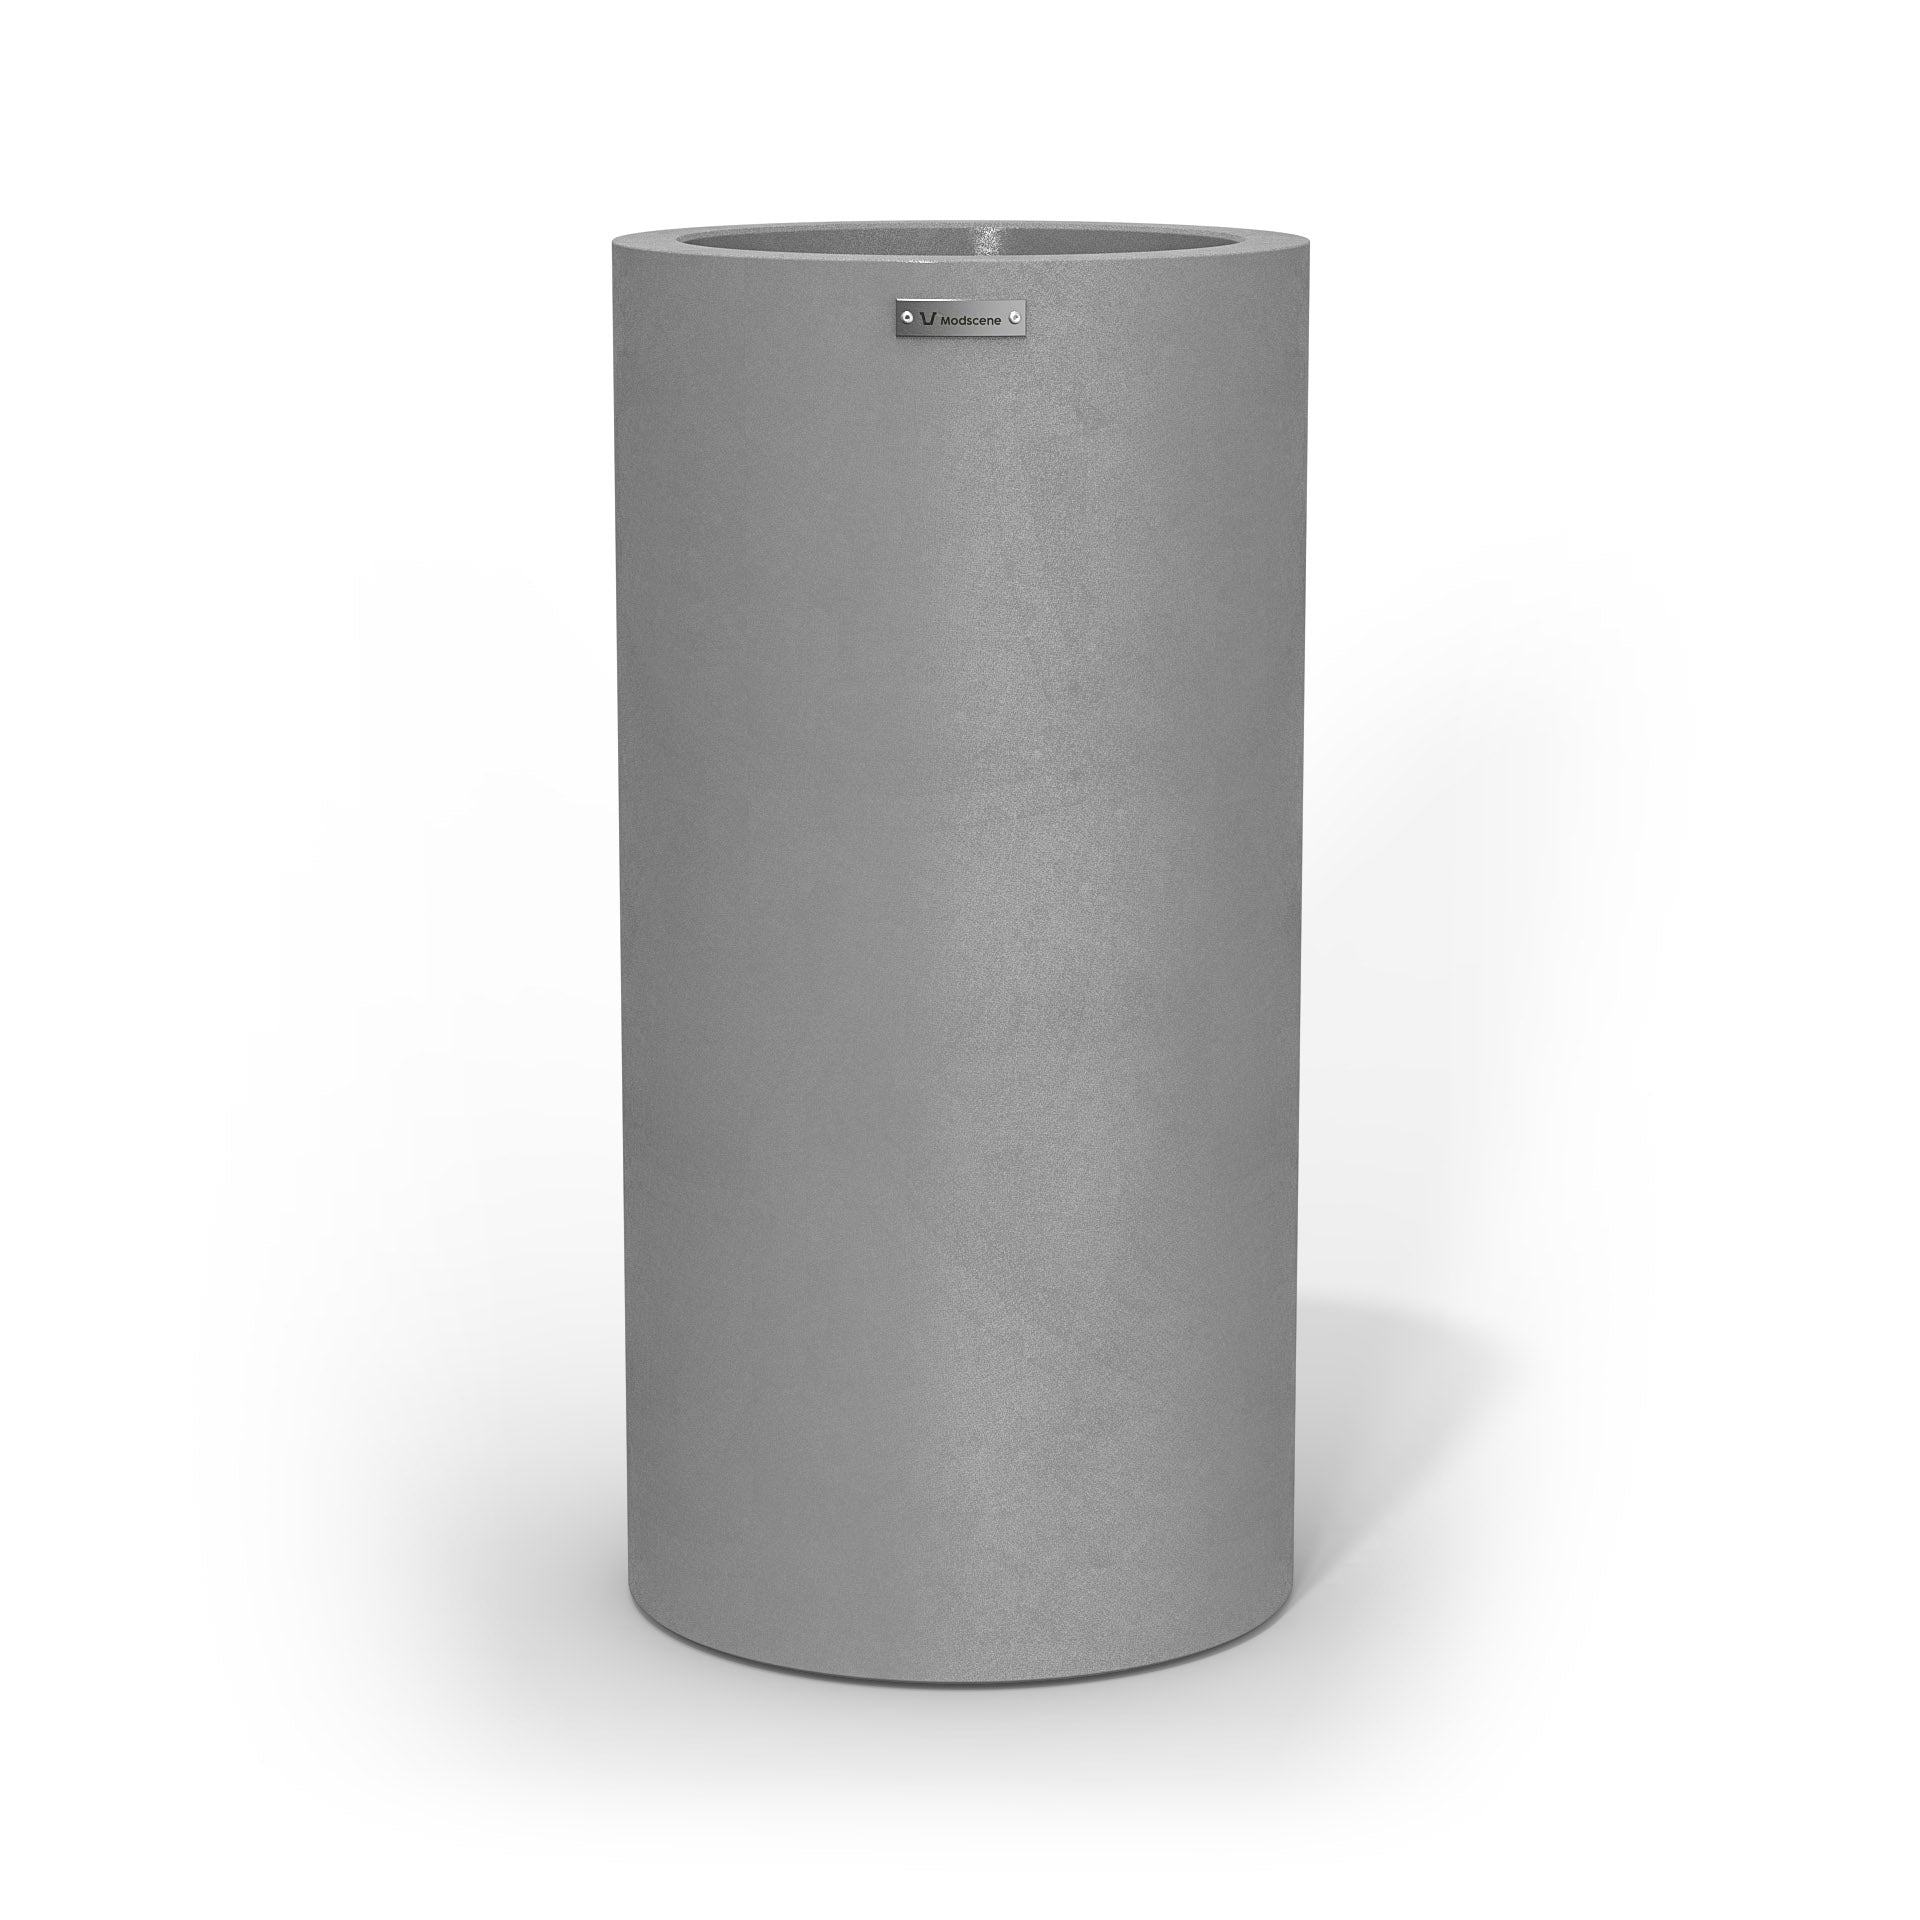 A large cigar cylinder pot planter in light grey with a concrete look finish.